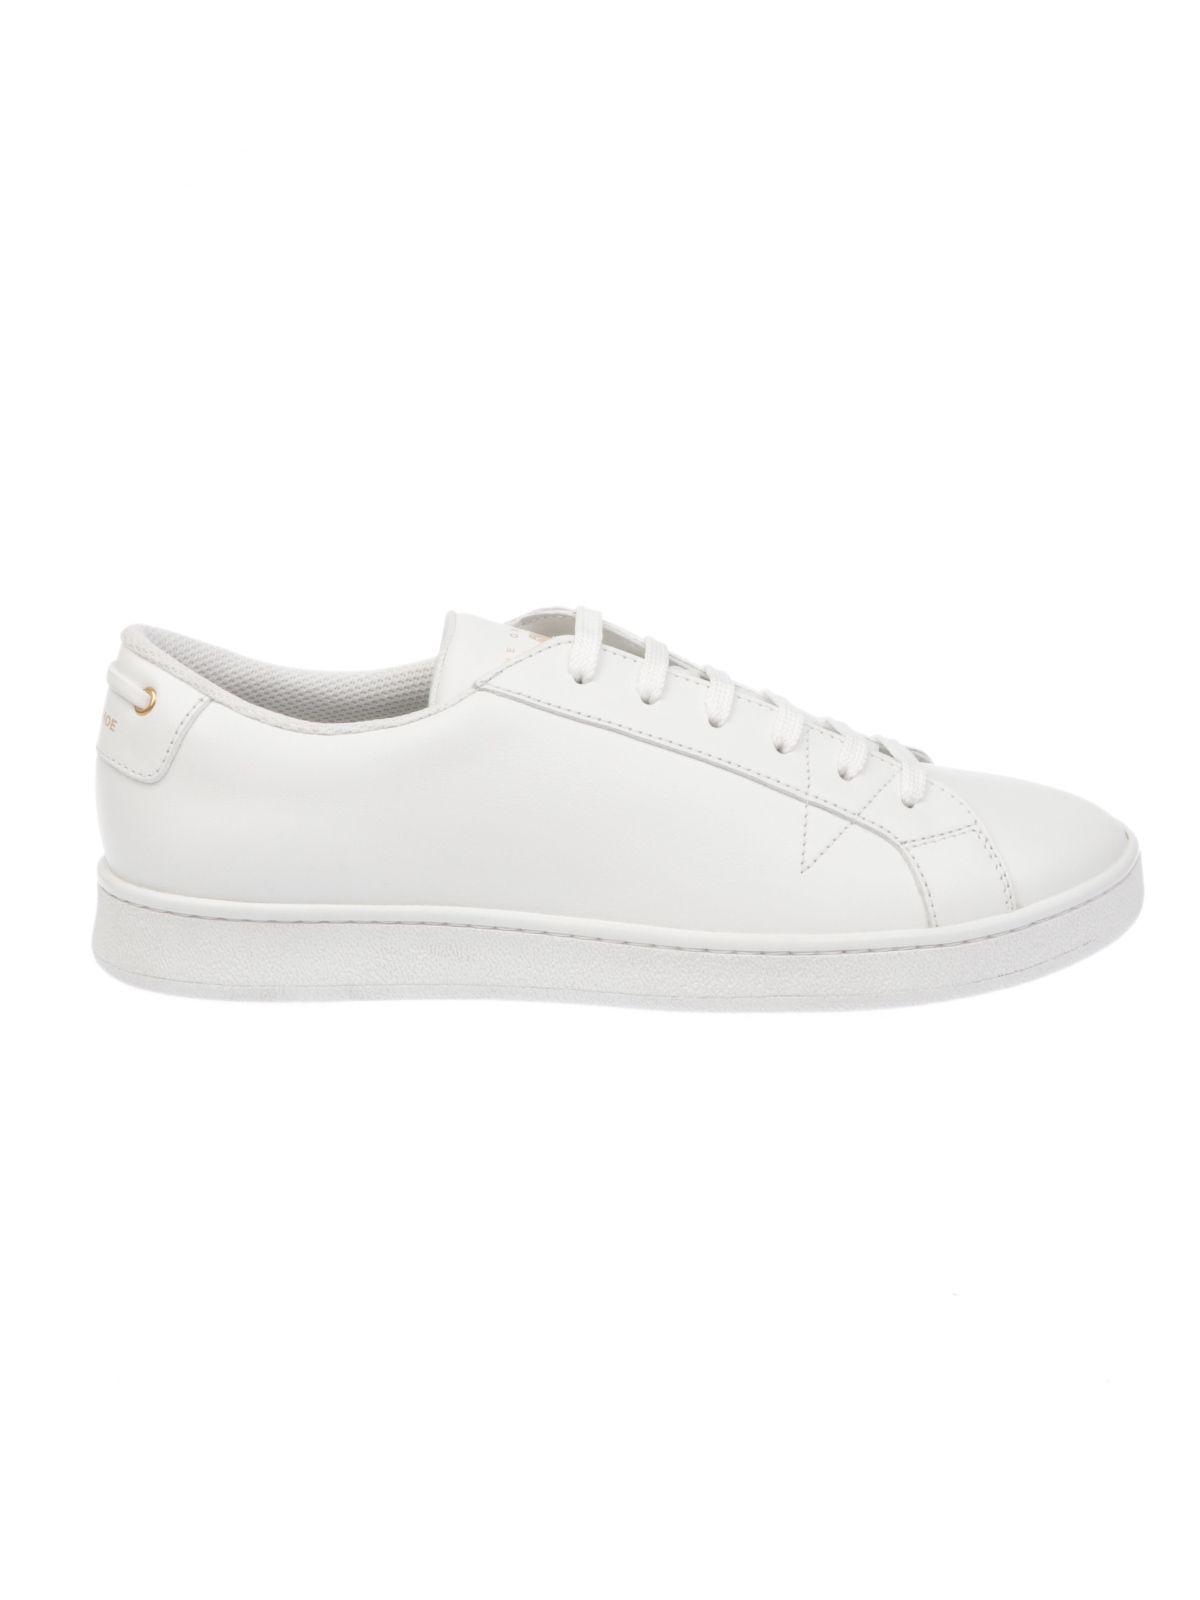 Car Shoe White Leather Sneakers in White for Men - Lyst